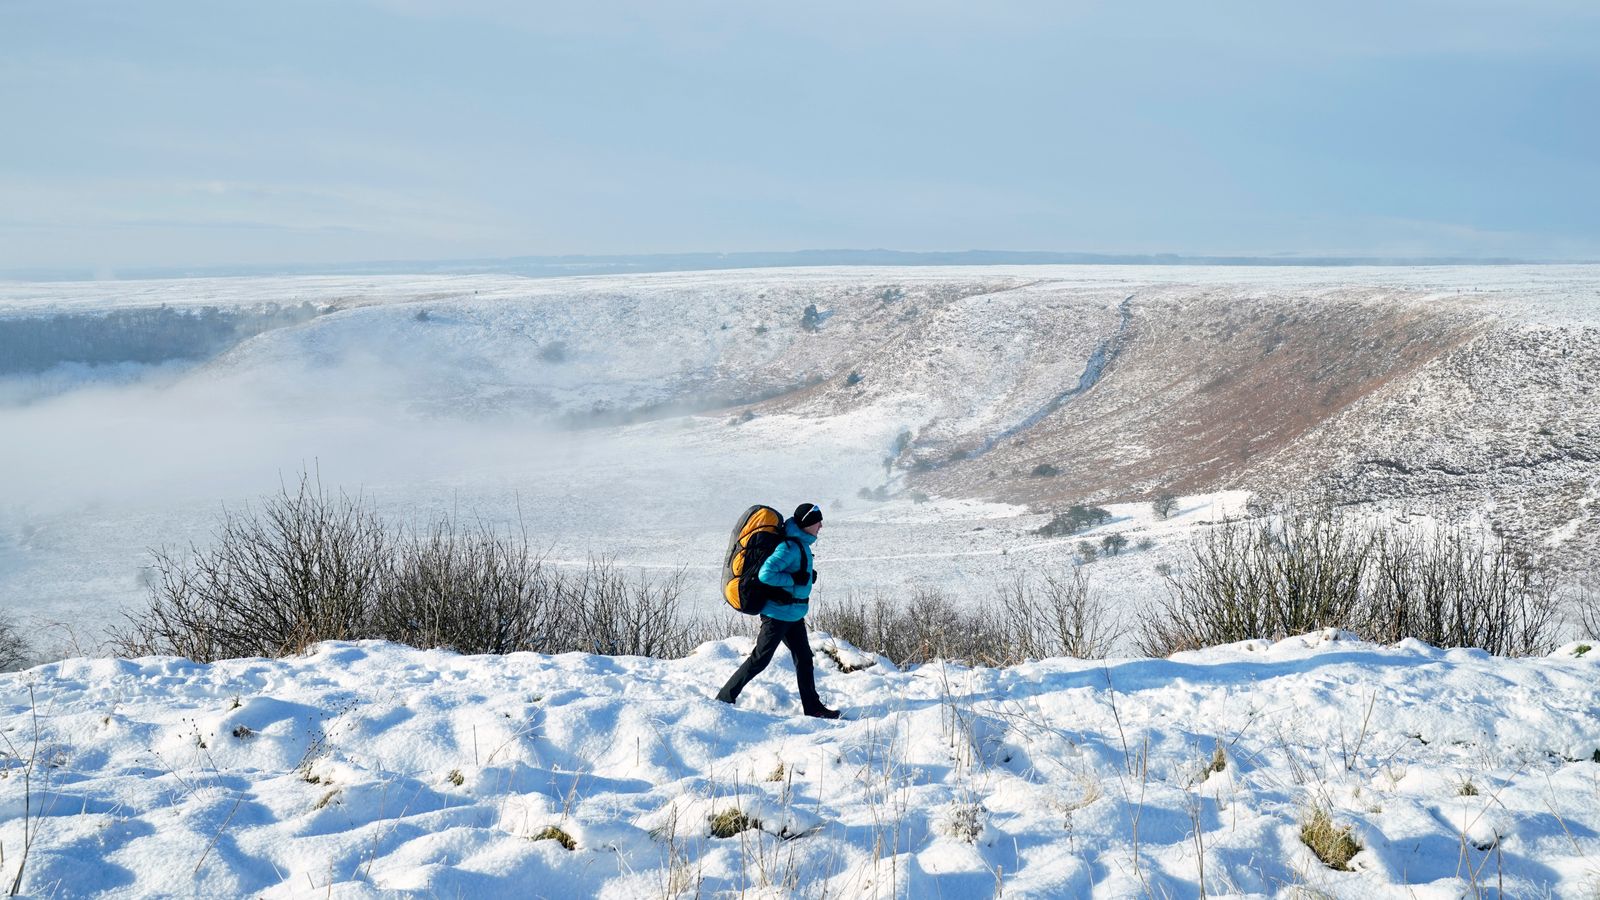 Weather in pictures: Snow starts to settle in UK as German city faces travel chaos